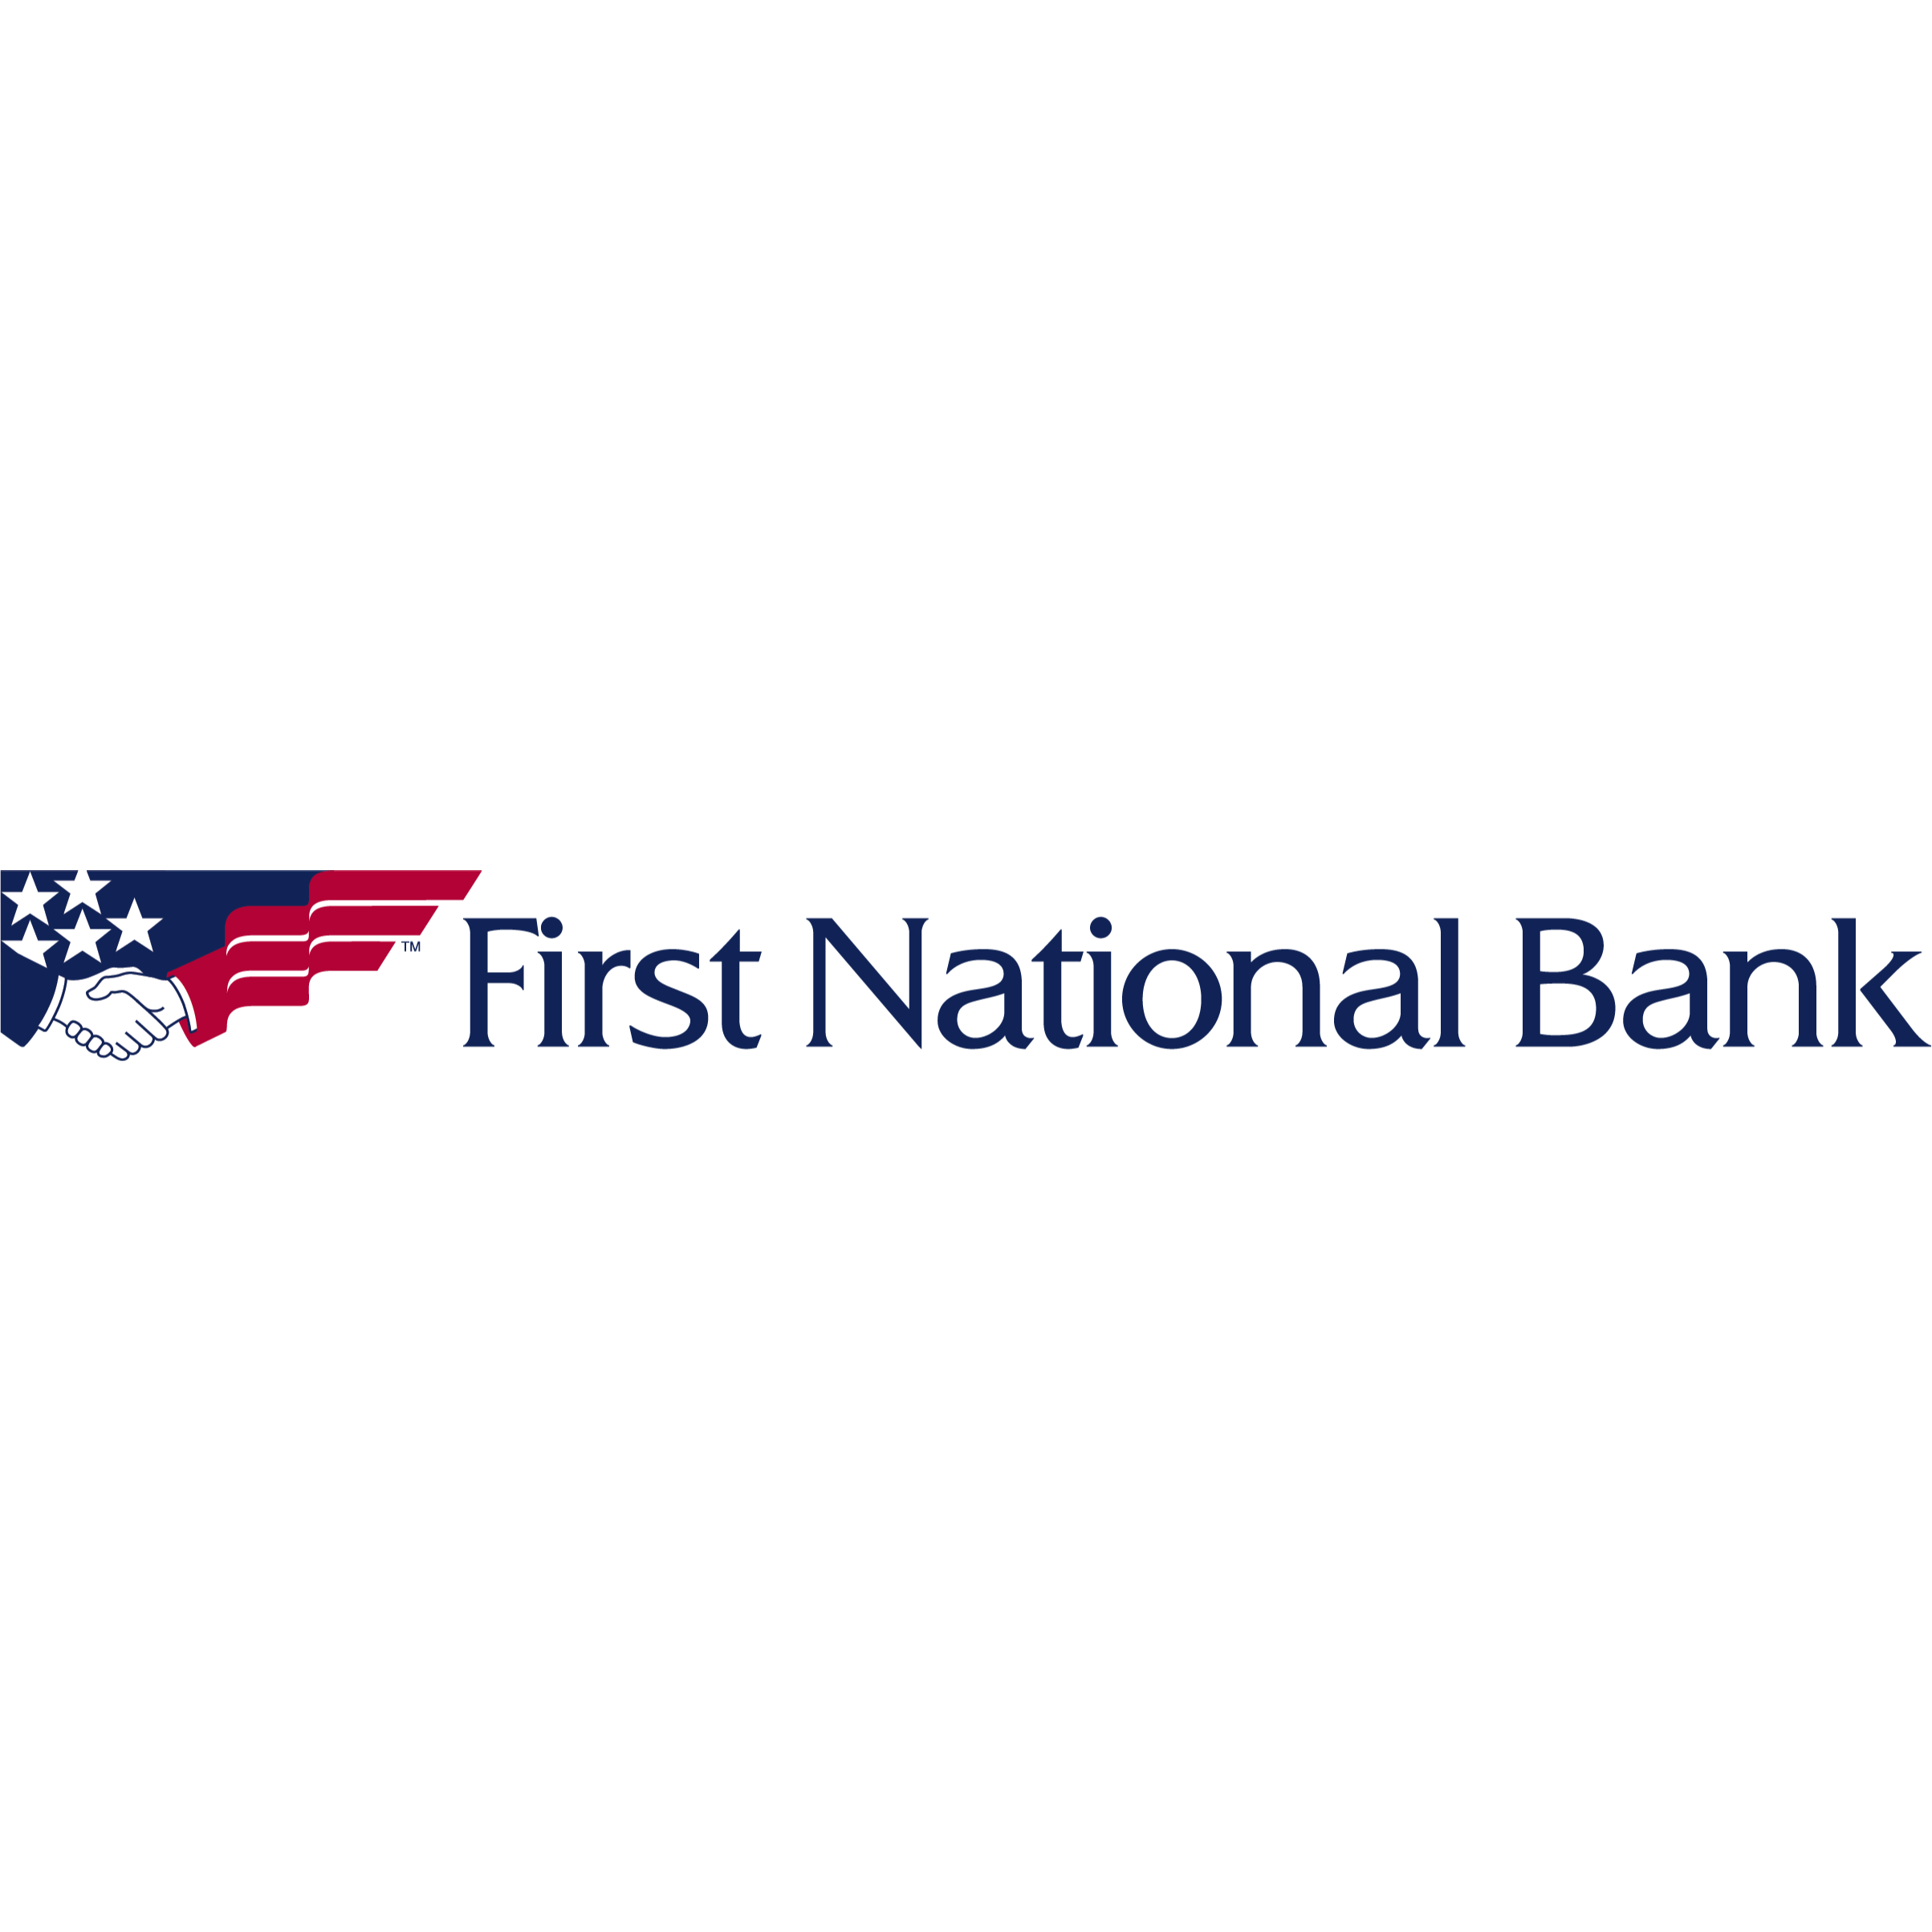 First National Bank First National Bank ATM Pittsburgh (800)555-5455